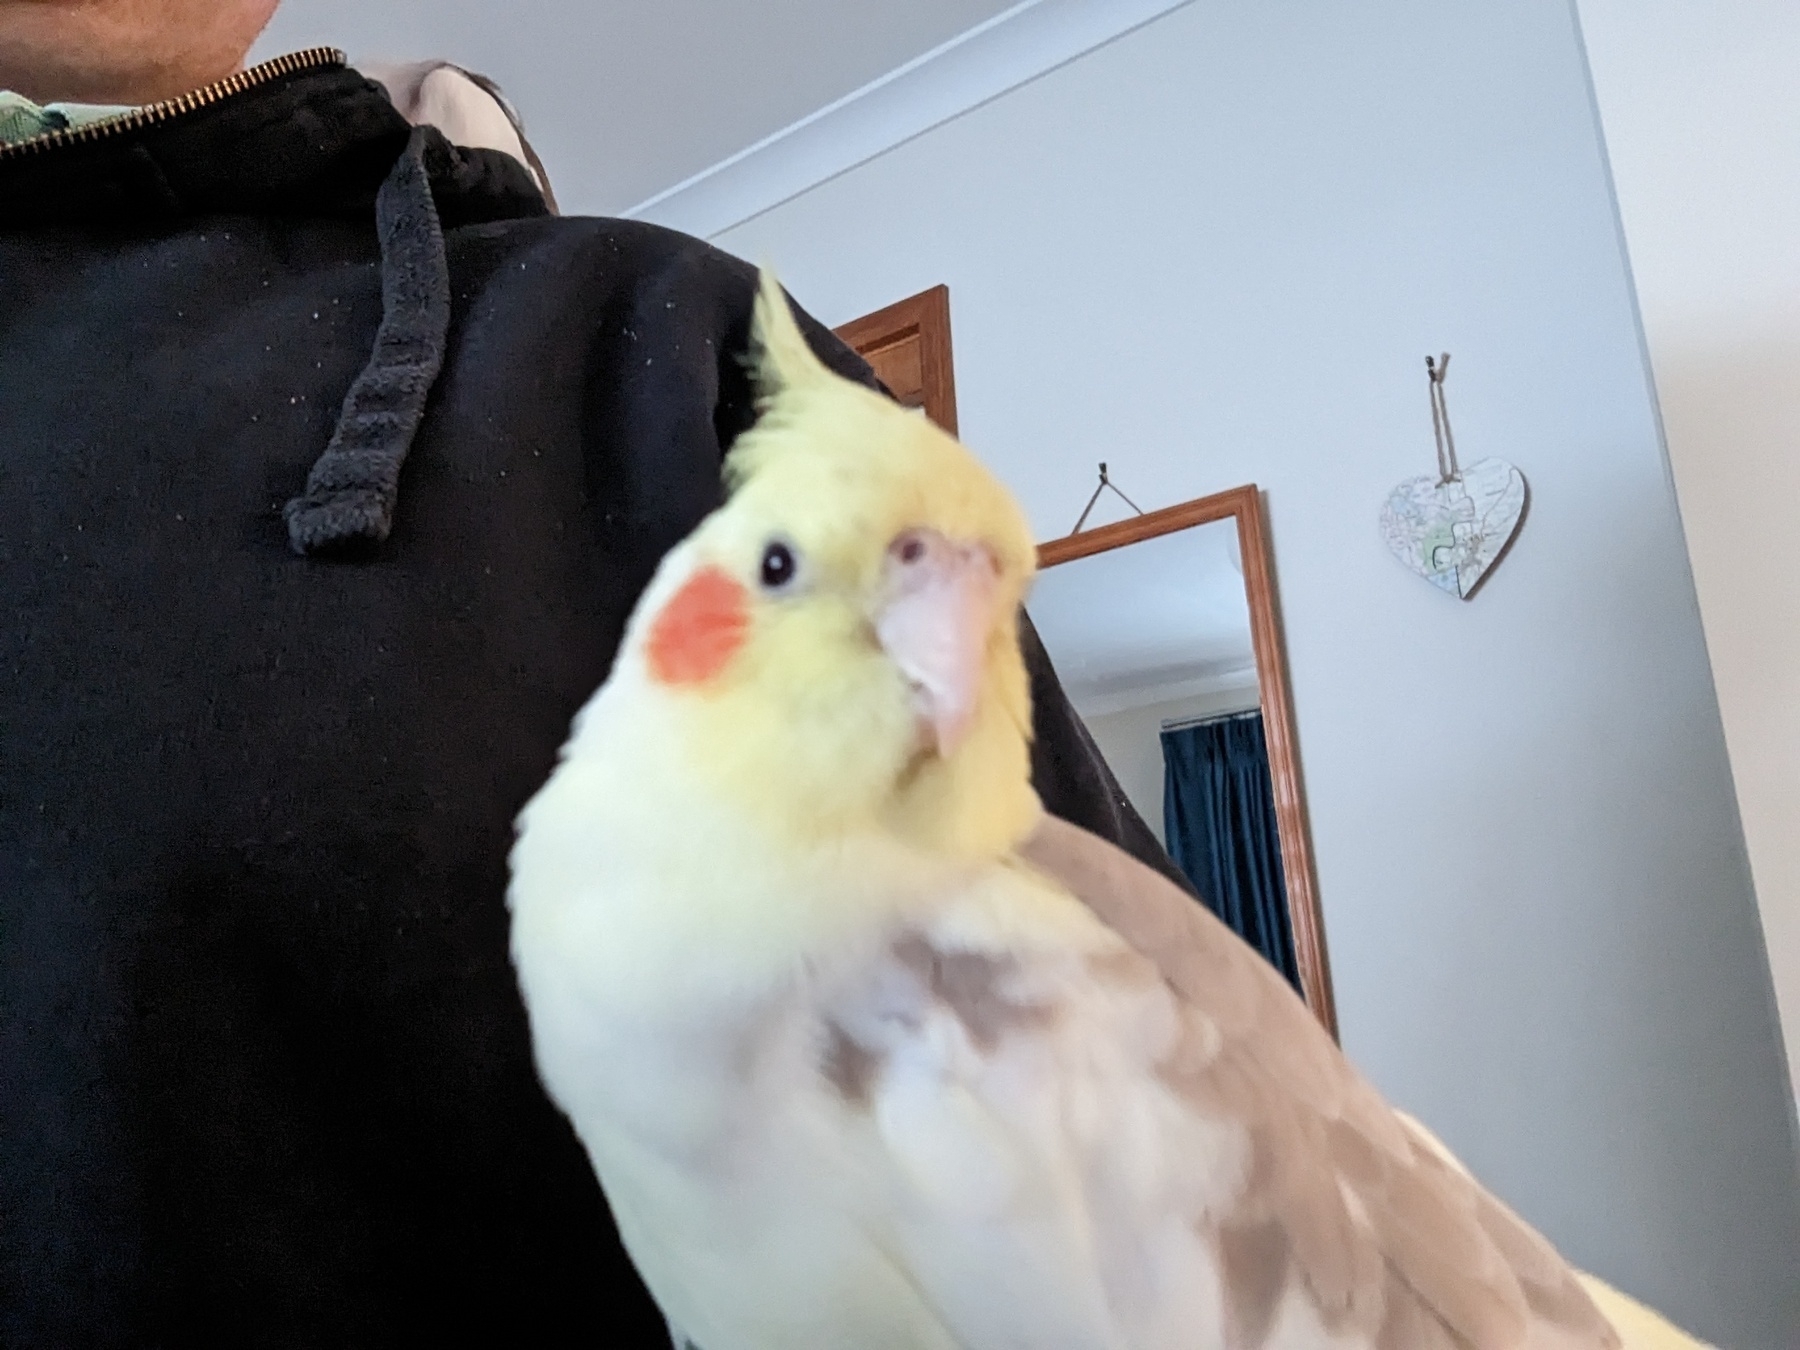 Archie, the yellow cockatiel, sitting on my arm.